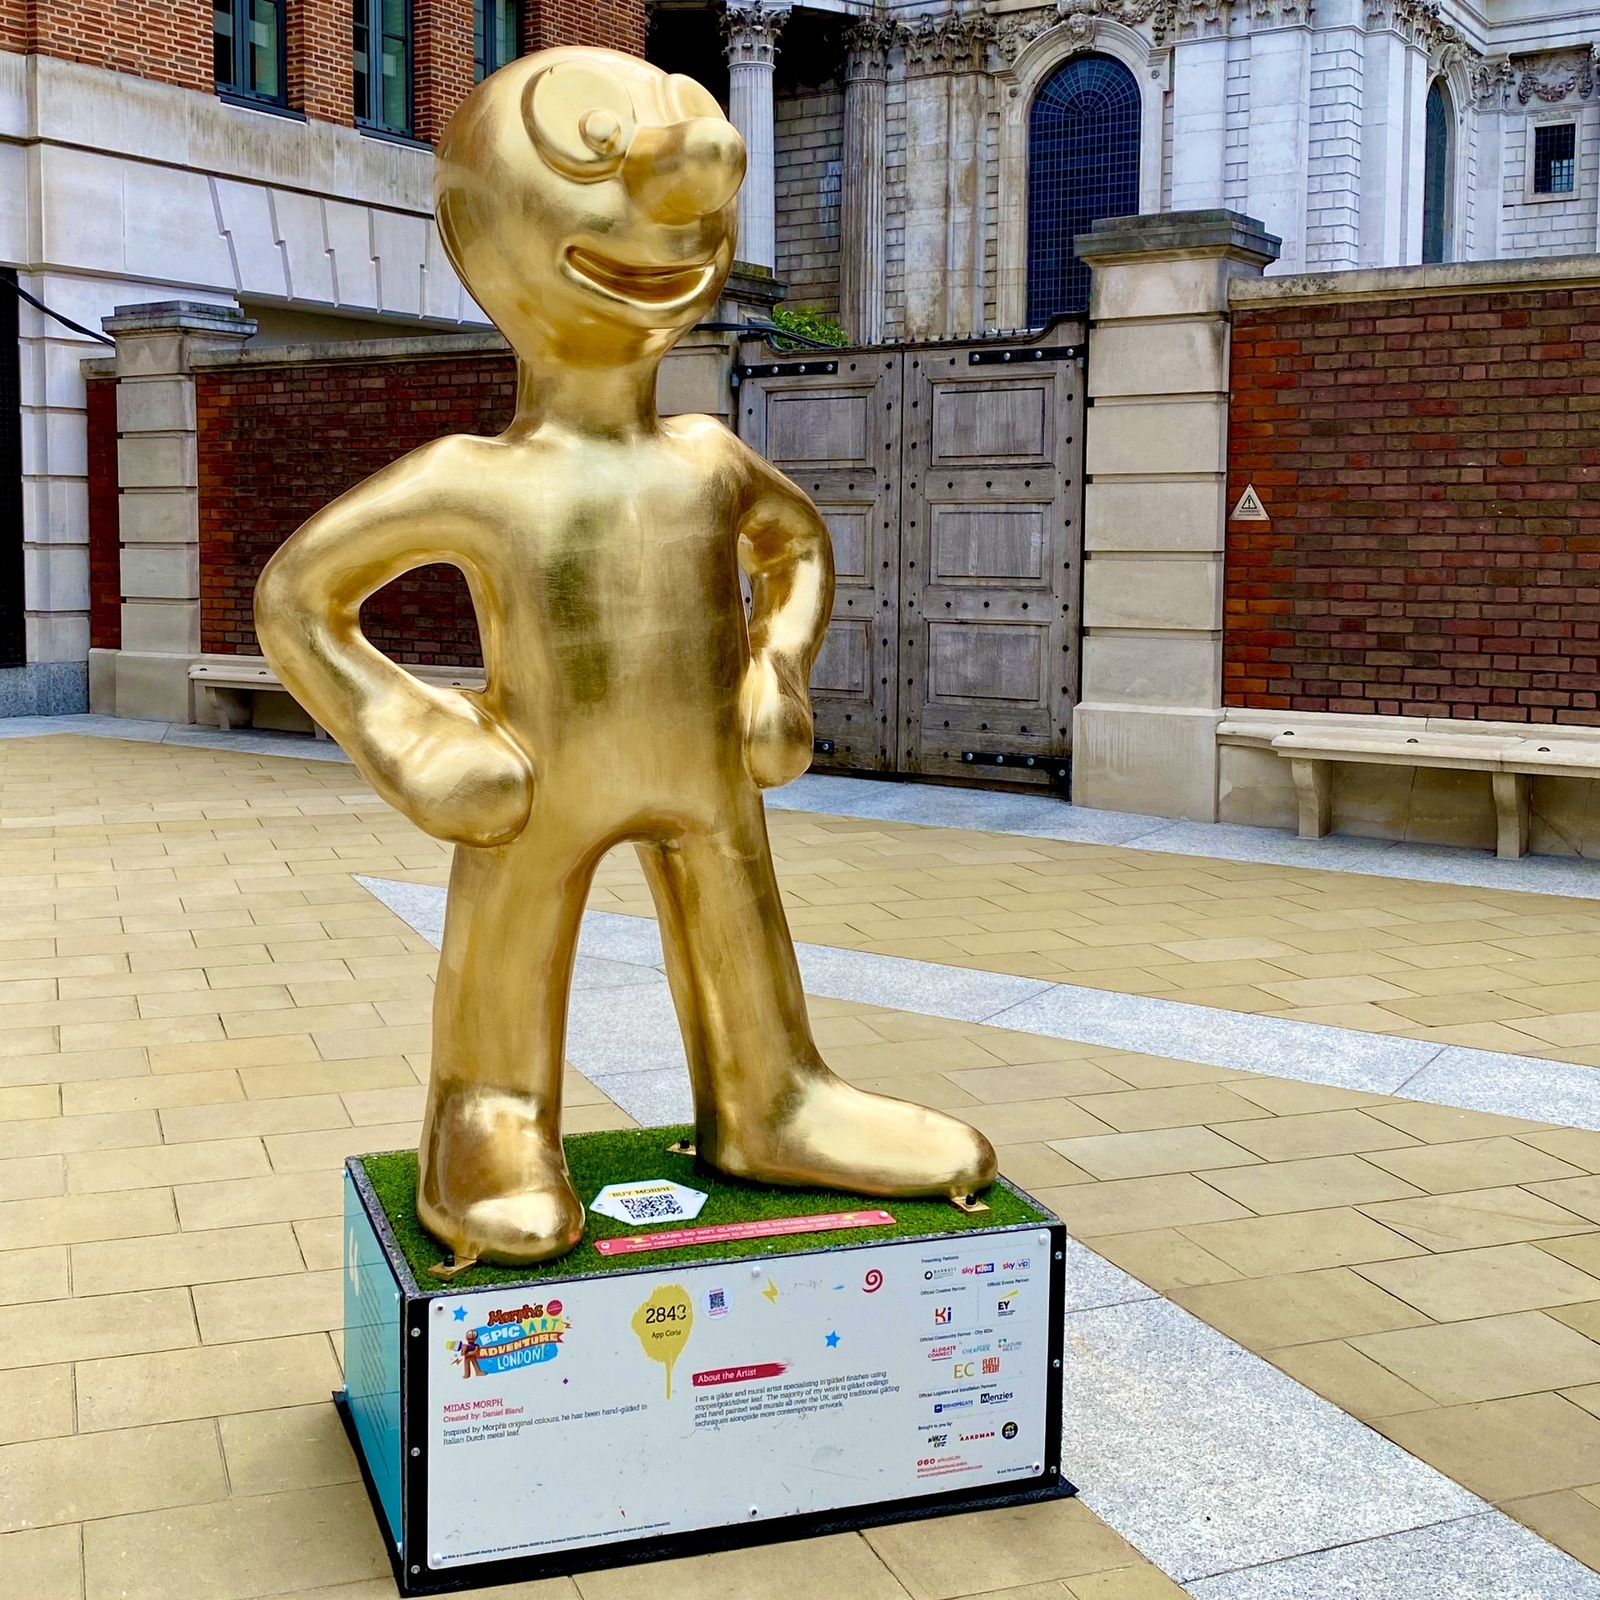 Until the 20th August, 70 individually designed Morphs will form an accessible Art Trail across The City which is step-free and wheelchair-friendly. A first for London!